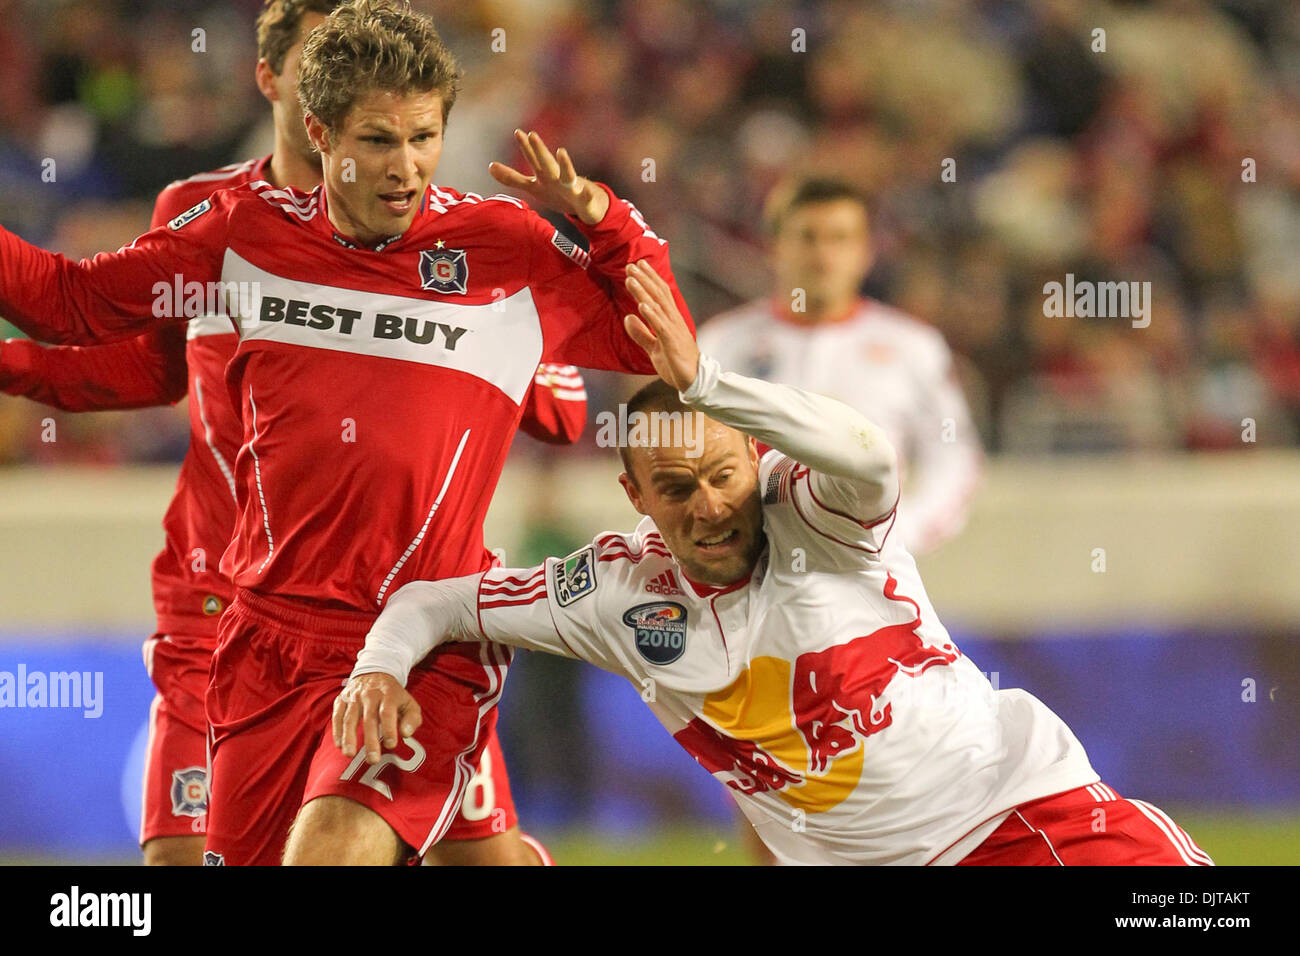 27  March 2010:   Red Bulls M Joel Lindpere (#20) and Chicago Fire D Logan Pause (#12) battle for the ball.The Red Bulls defeated Chicago Fire 1-0  in the game held at Red Bull Arena, Harrison, NJ. (Credit Image: © Anthony Gruppuso/Southcreek Global/ZUMApress.com) Stock Photo